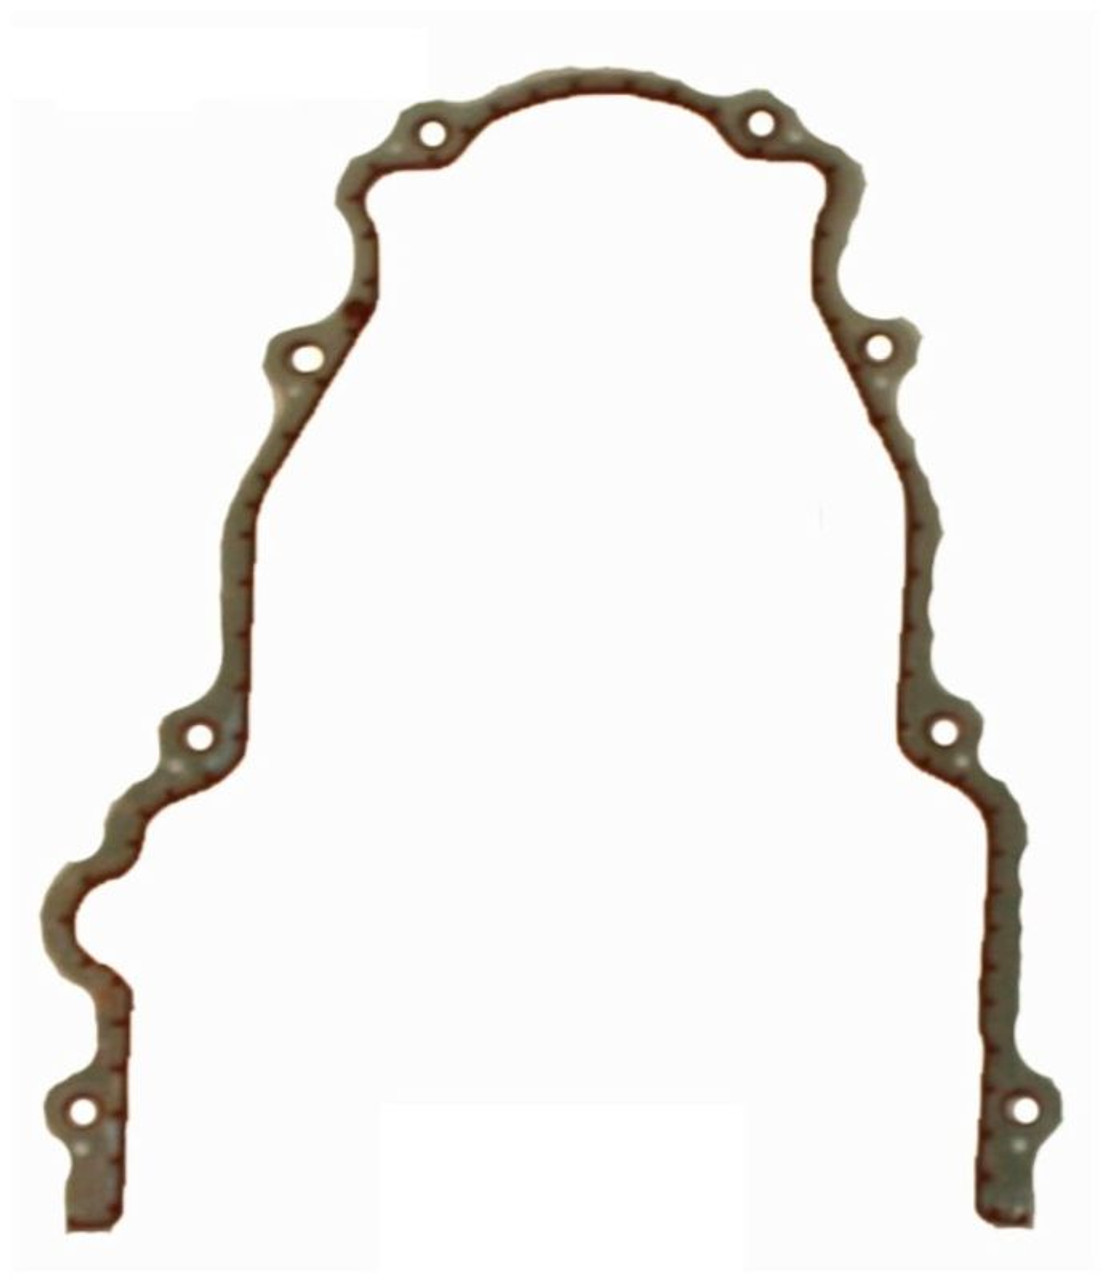 2003 Chevrolet Tahoe 4.8L Engine Timing Cover Gasket TCG293-A -140